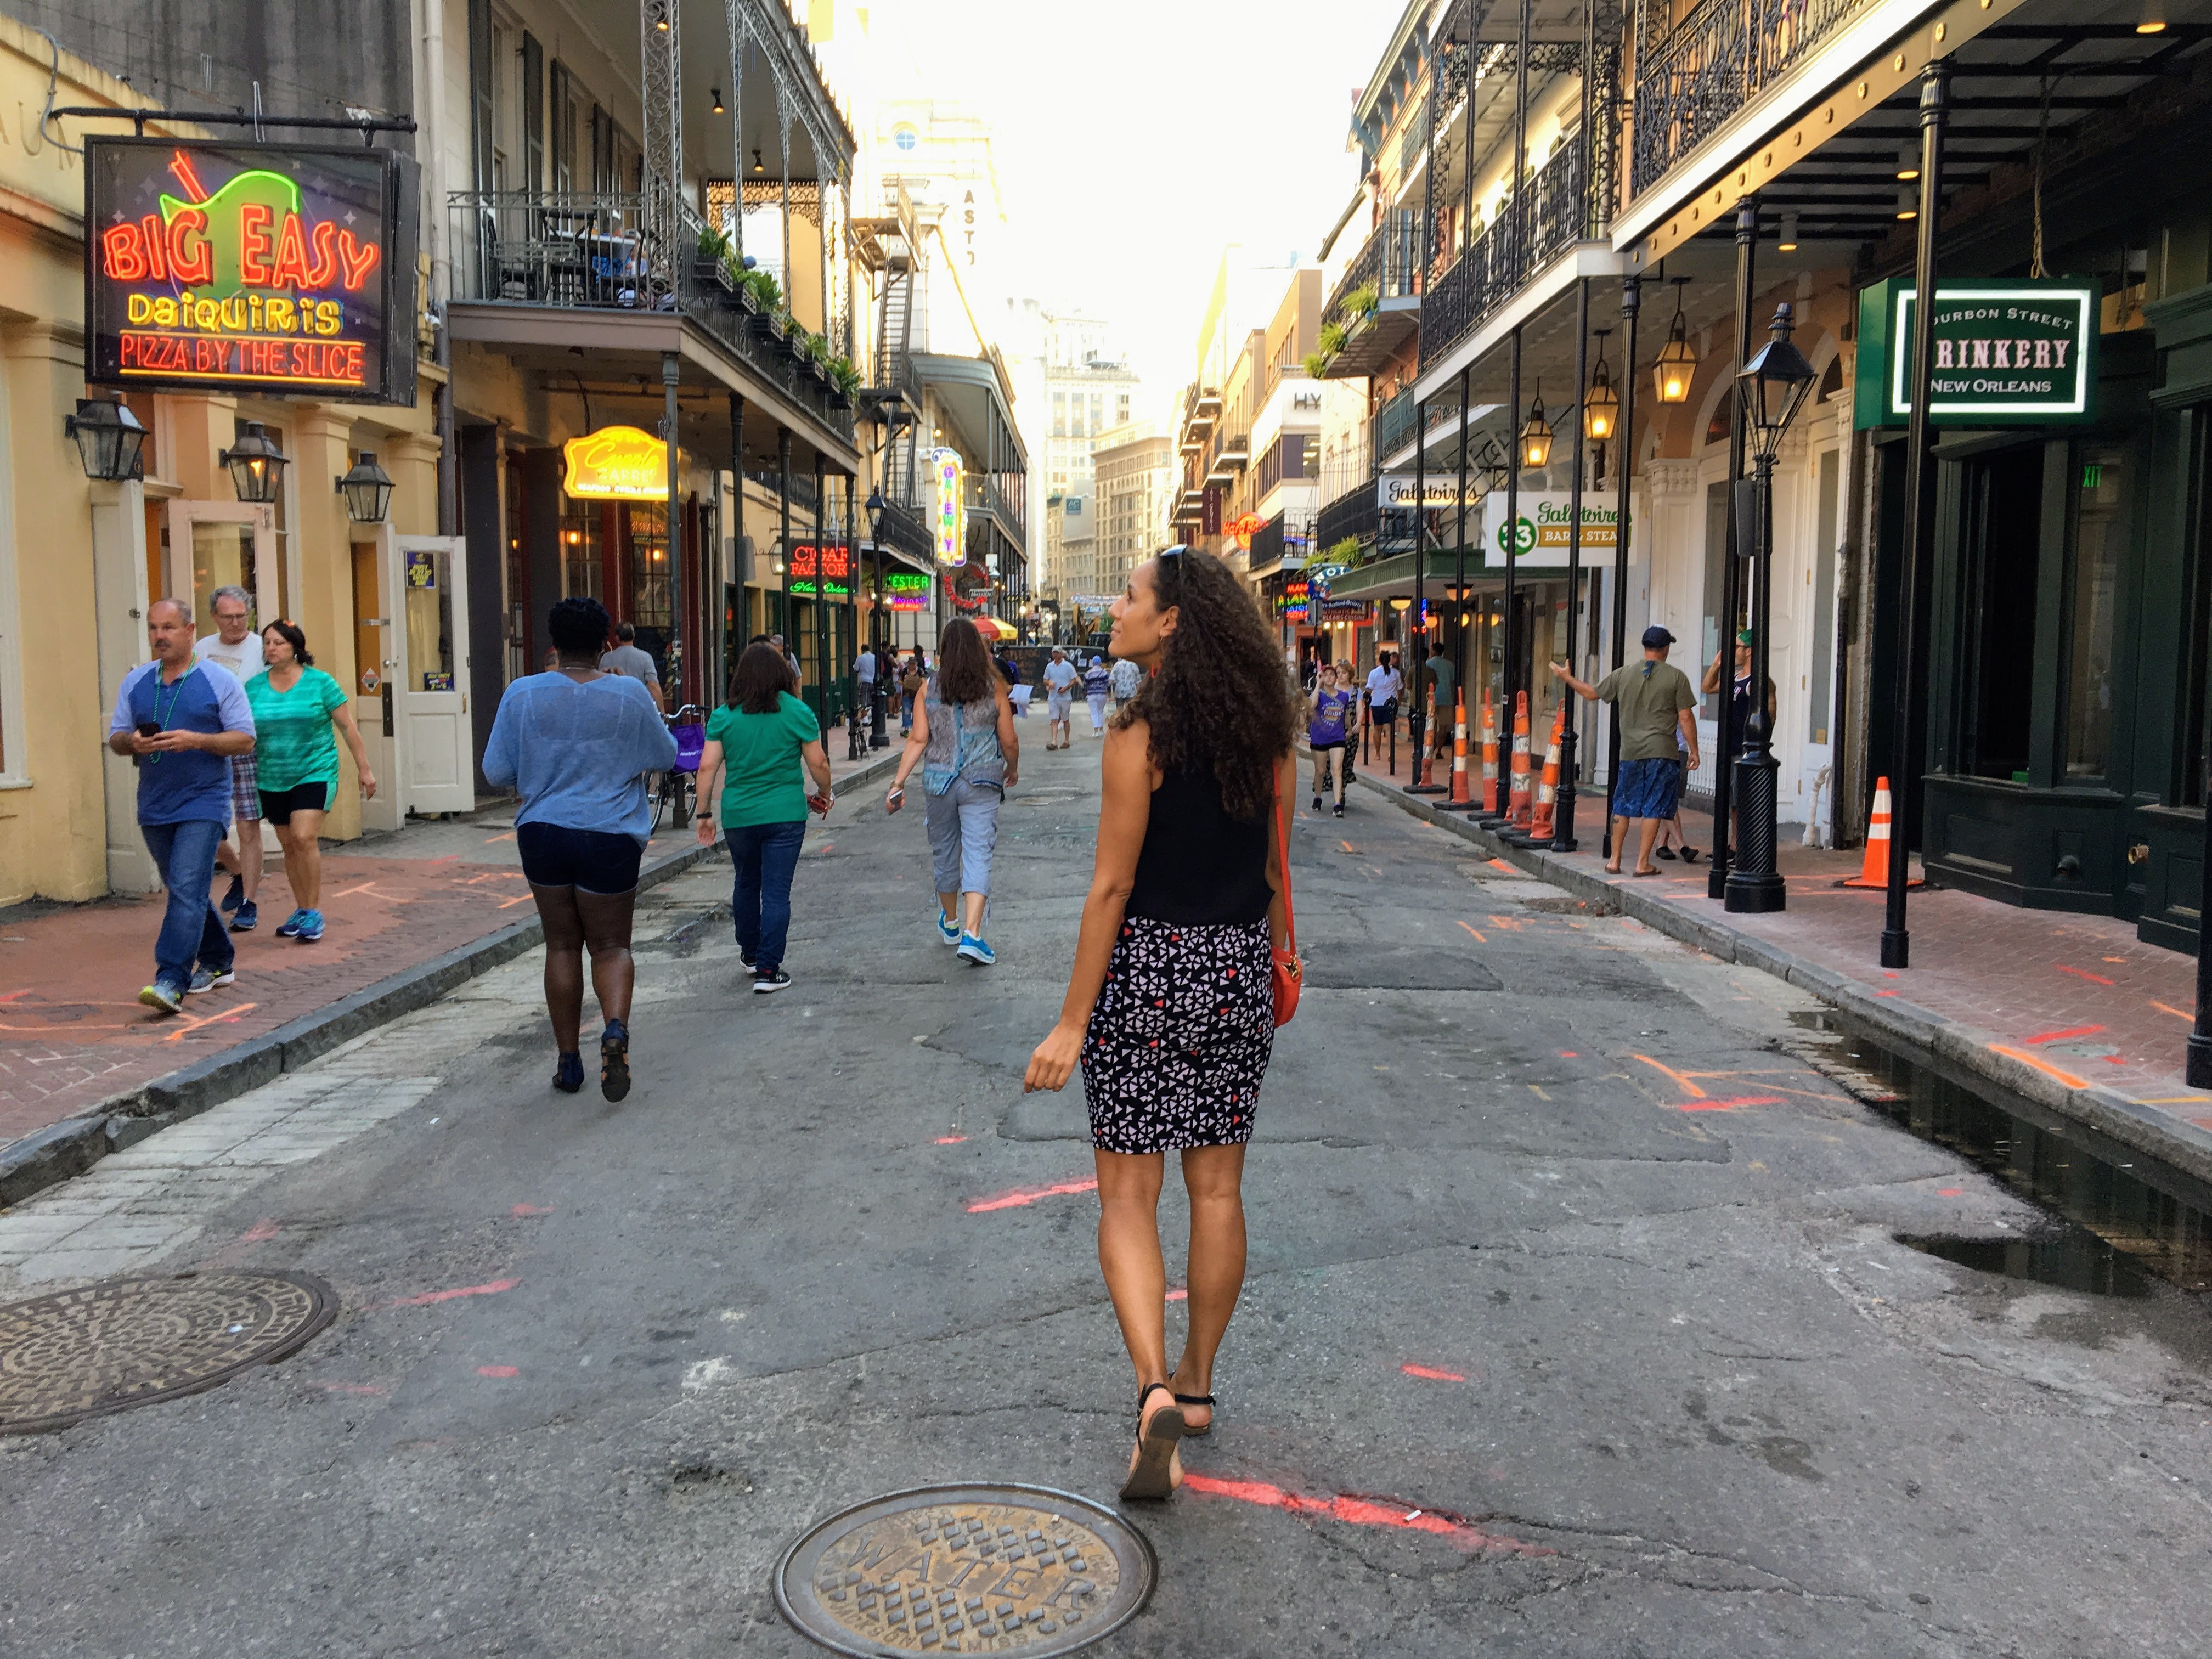 Walking through the French Quarter in New Orleans, Louisiana